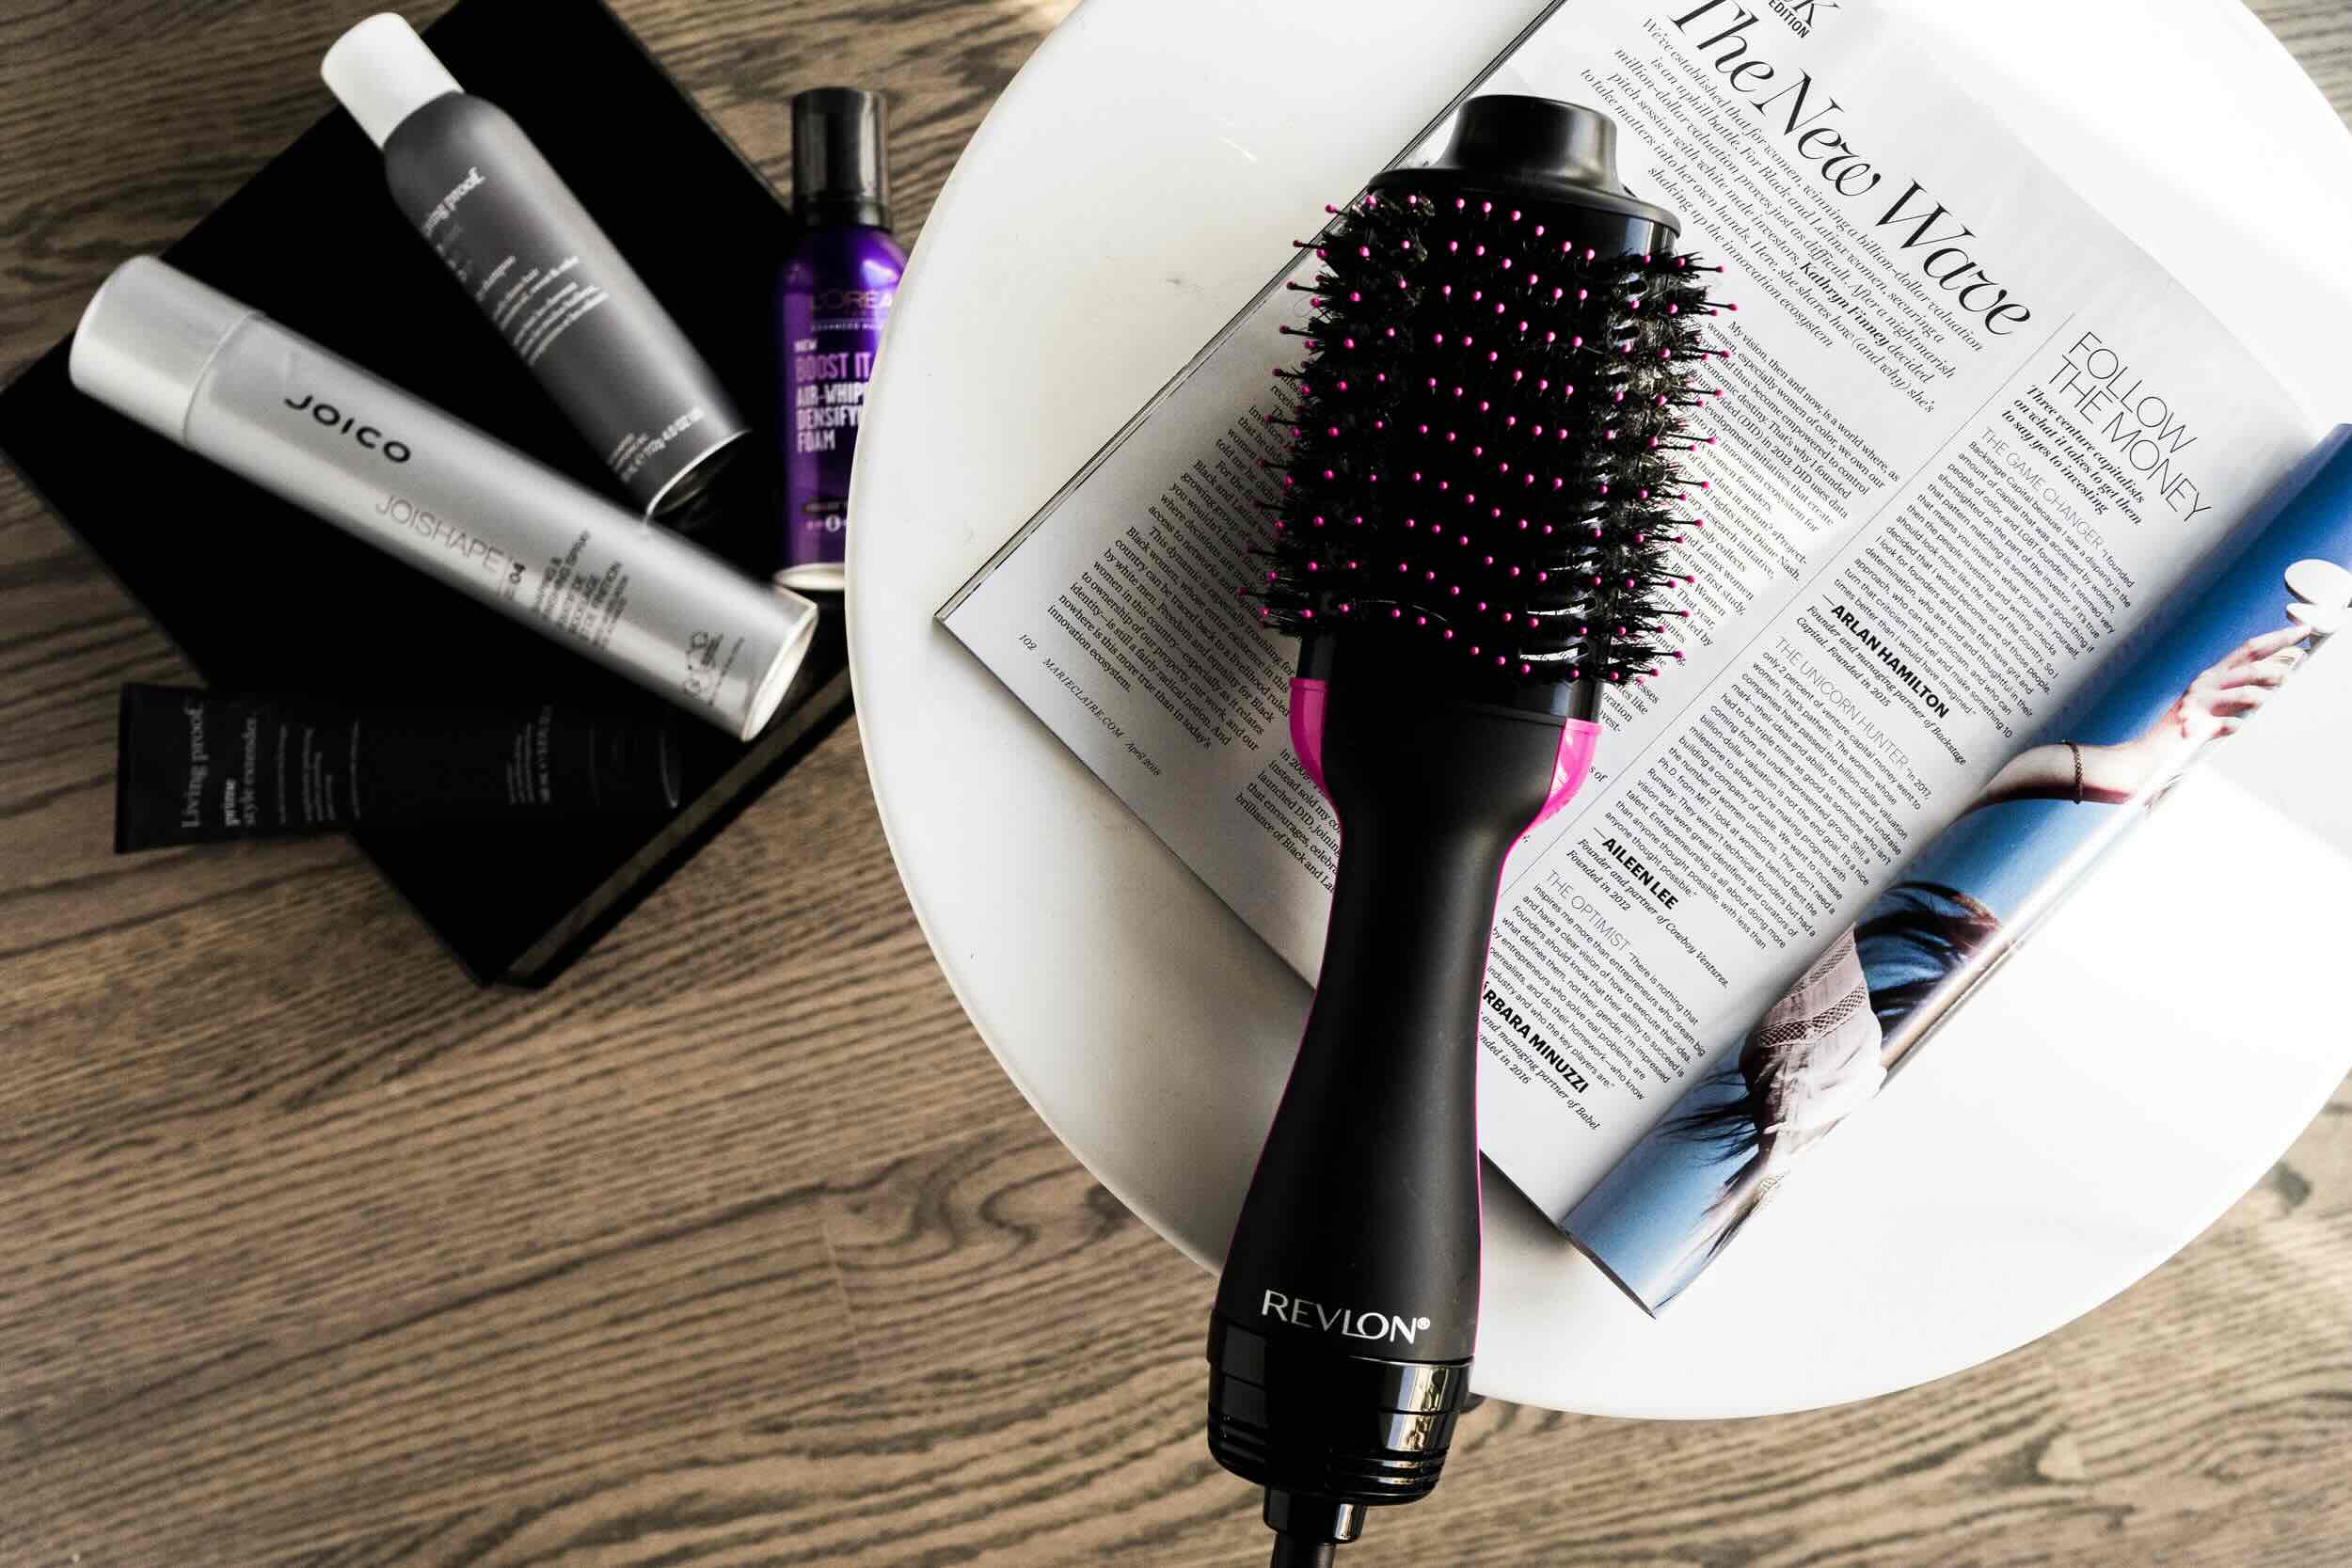 Revlon Hair Dryer Brush: How to Properly Clean and Maintain It